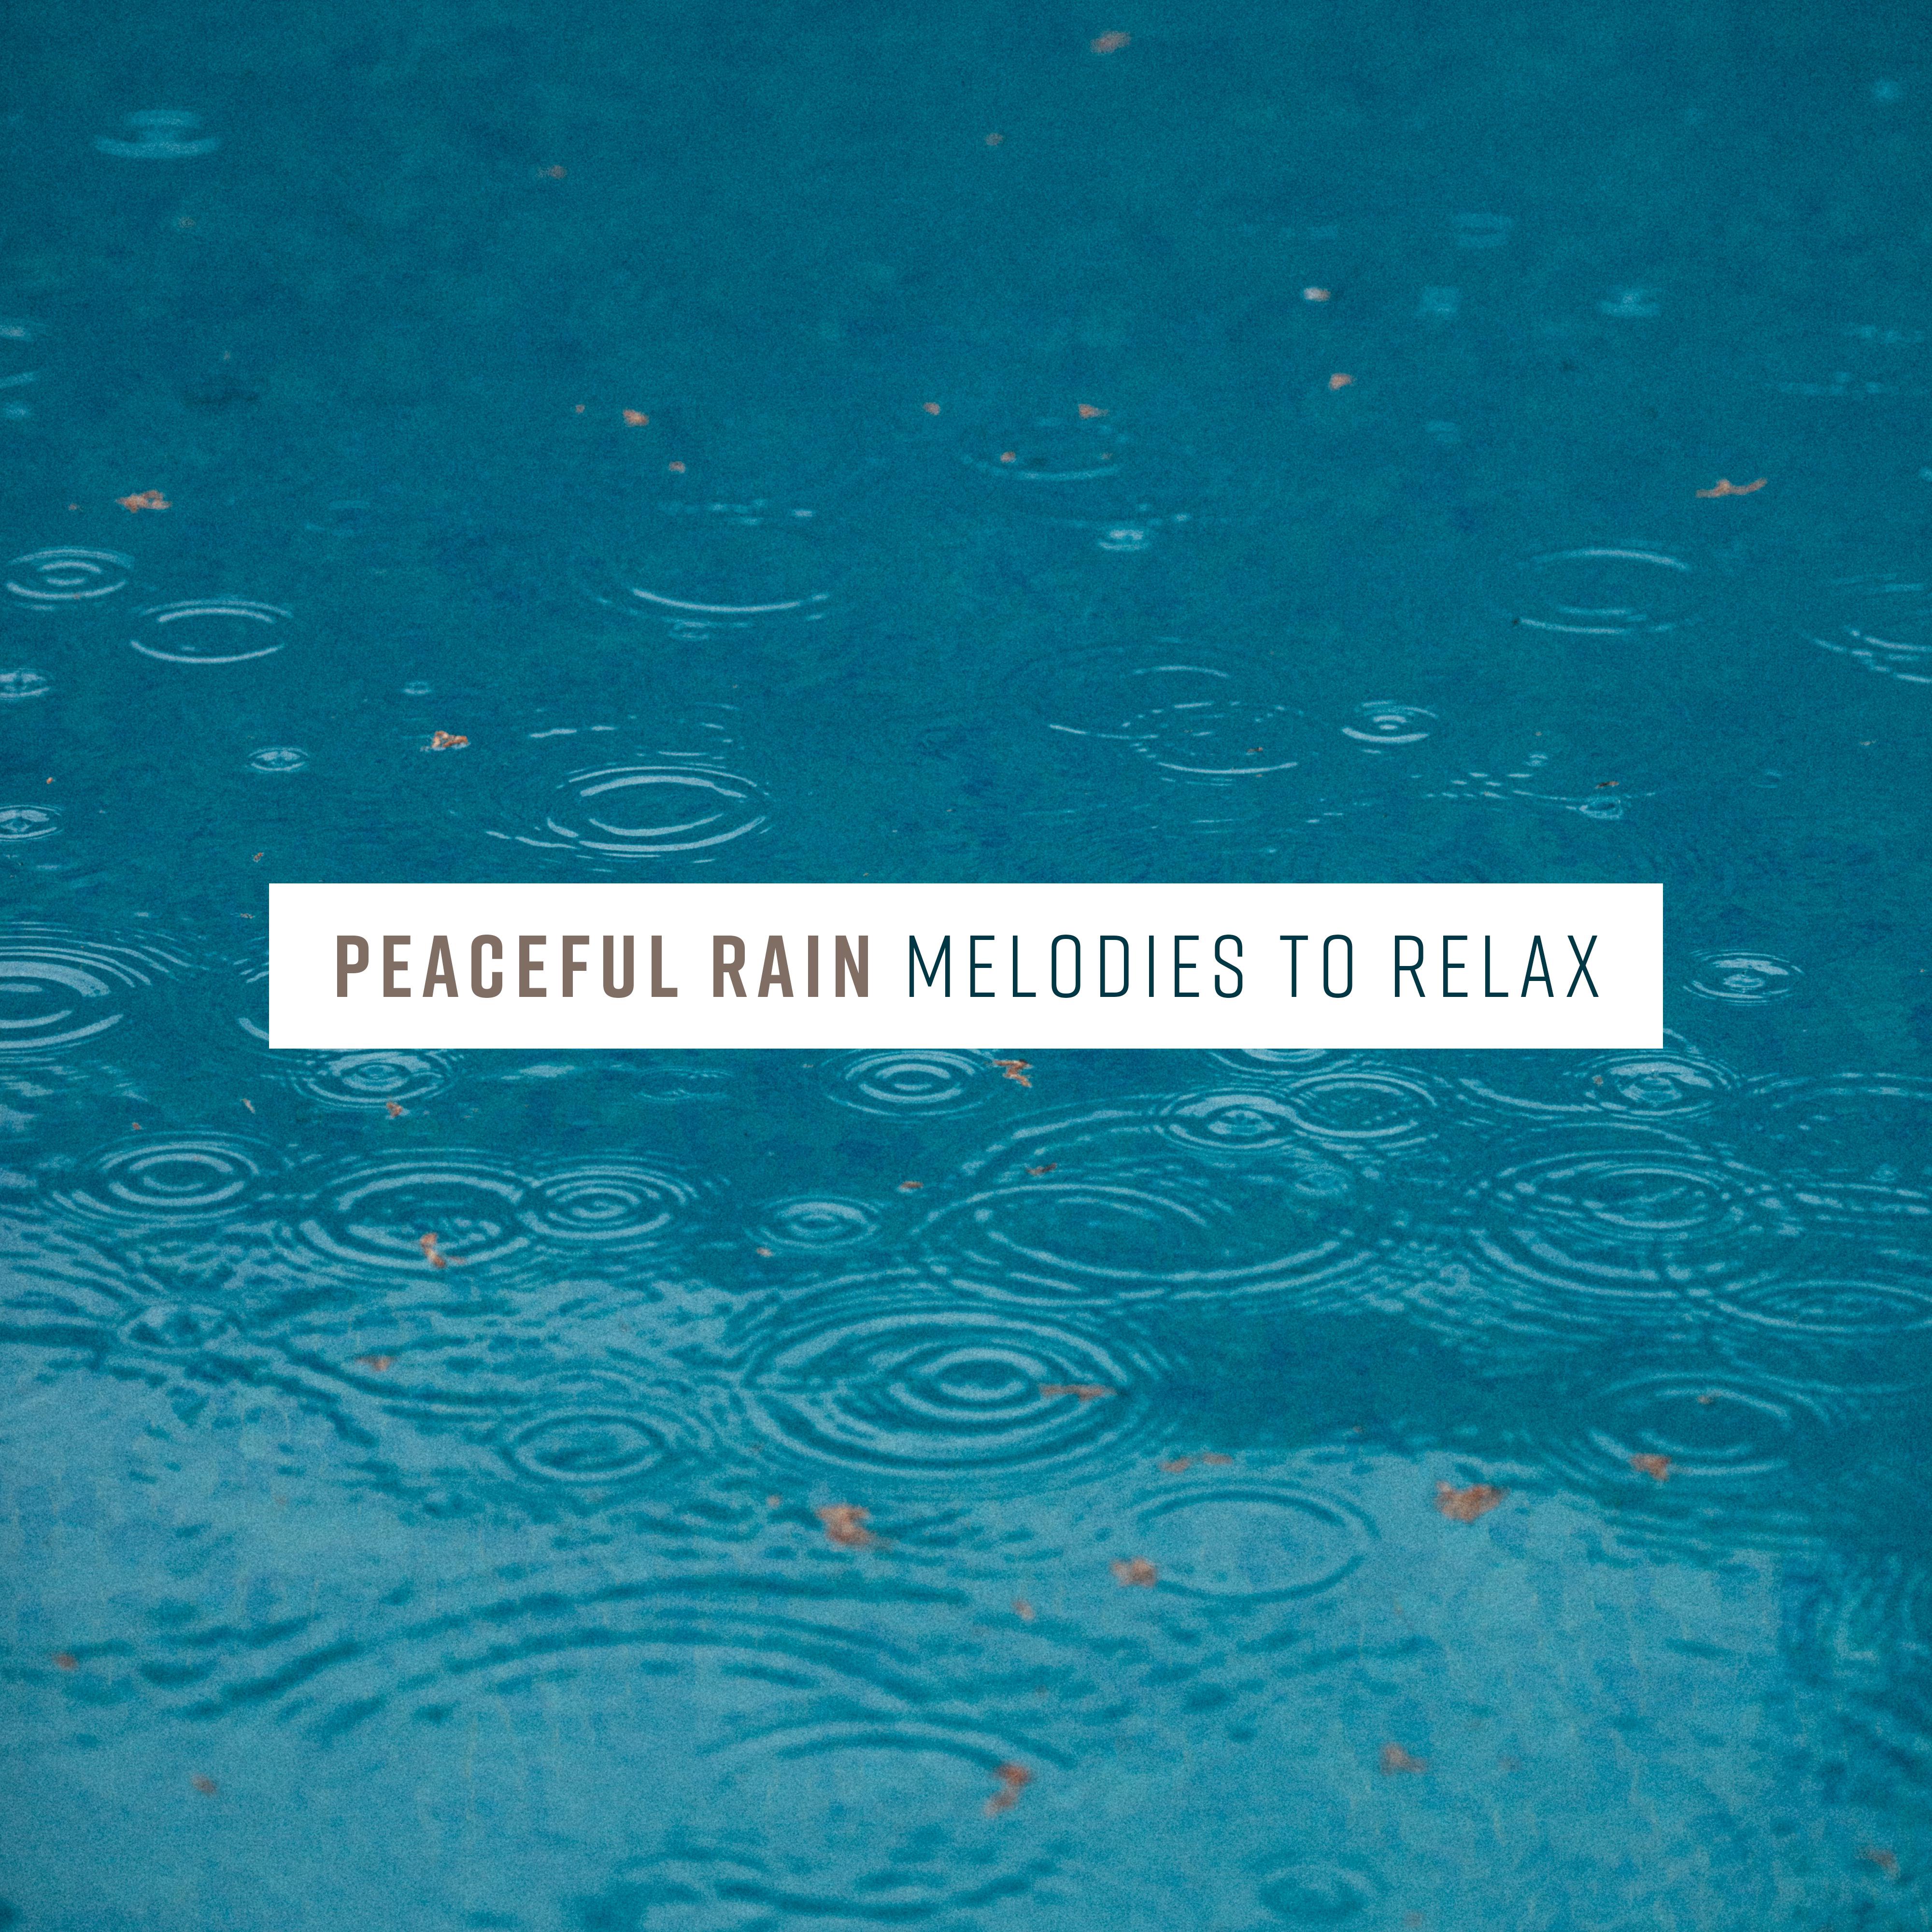 Peaceful Rain Melodies to Relax